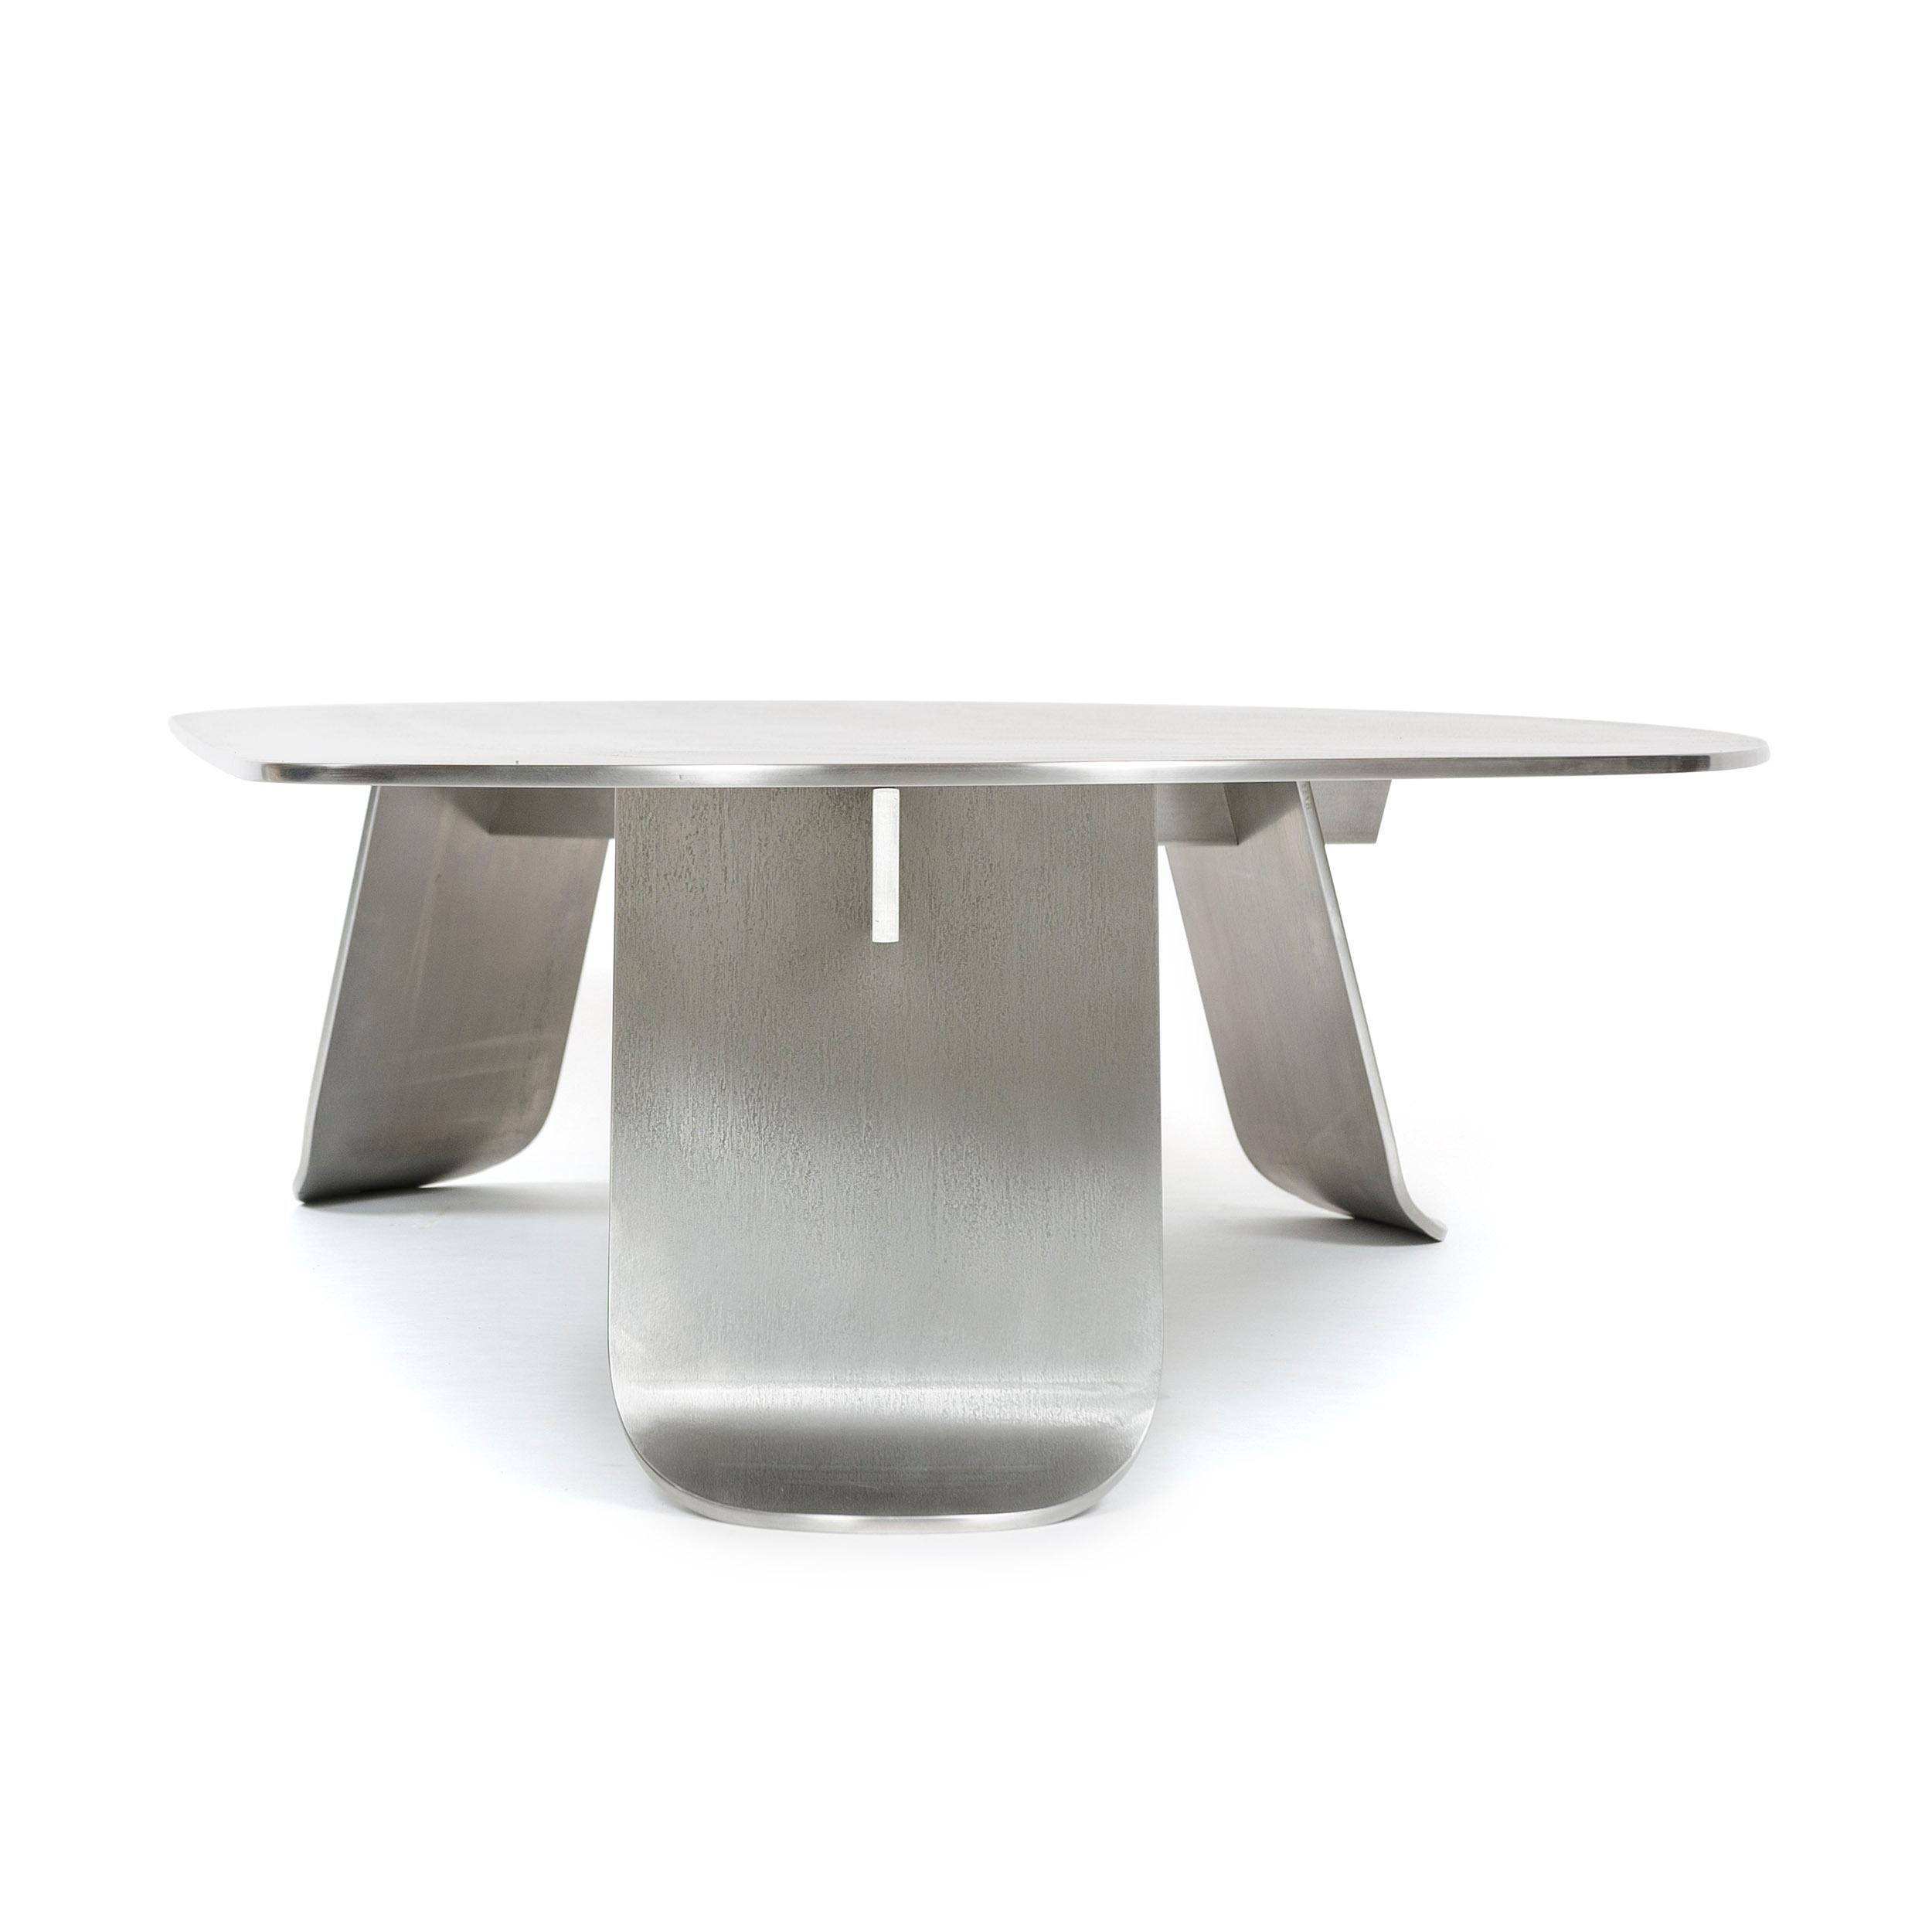 WYETH Chrysalis Table No. 1 in Natural Grain Stainless Steel For Sale 3